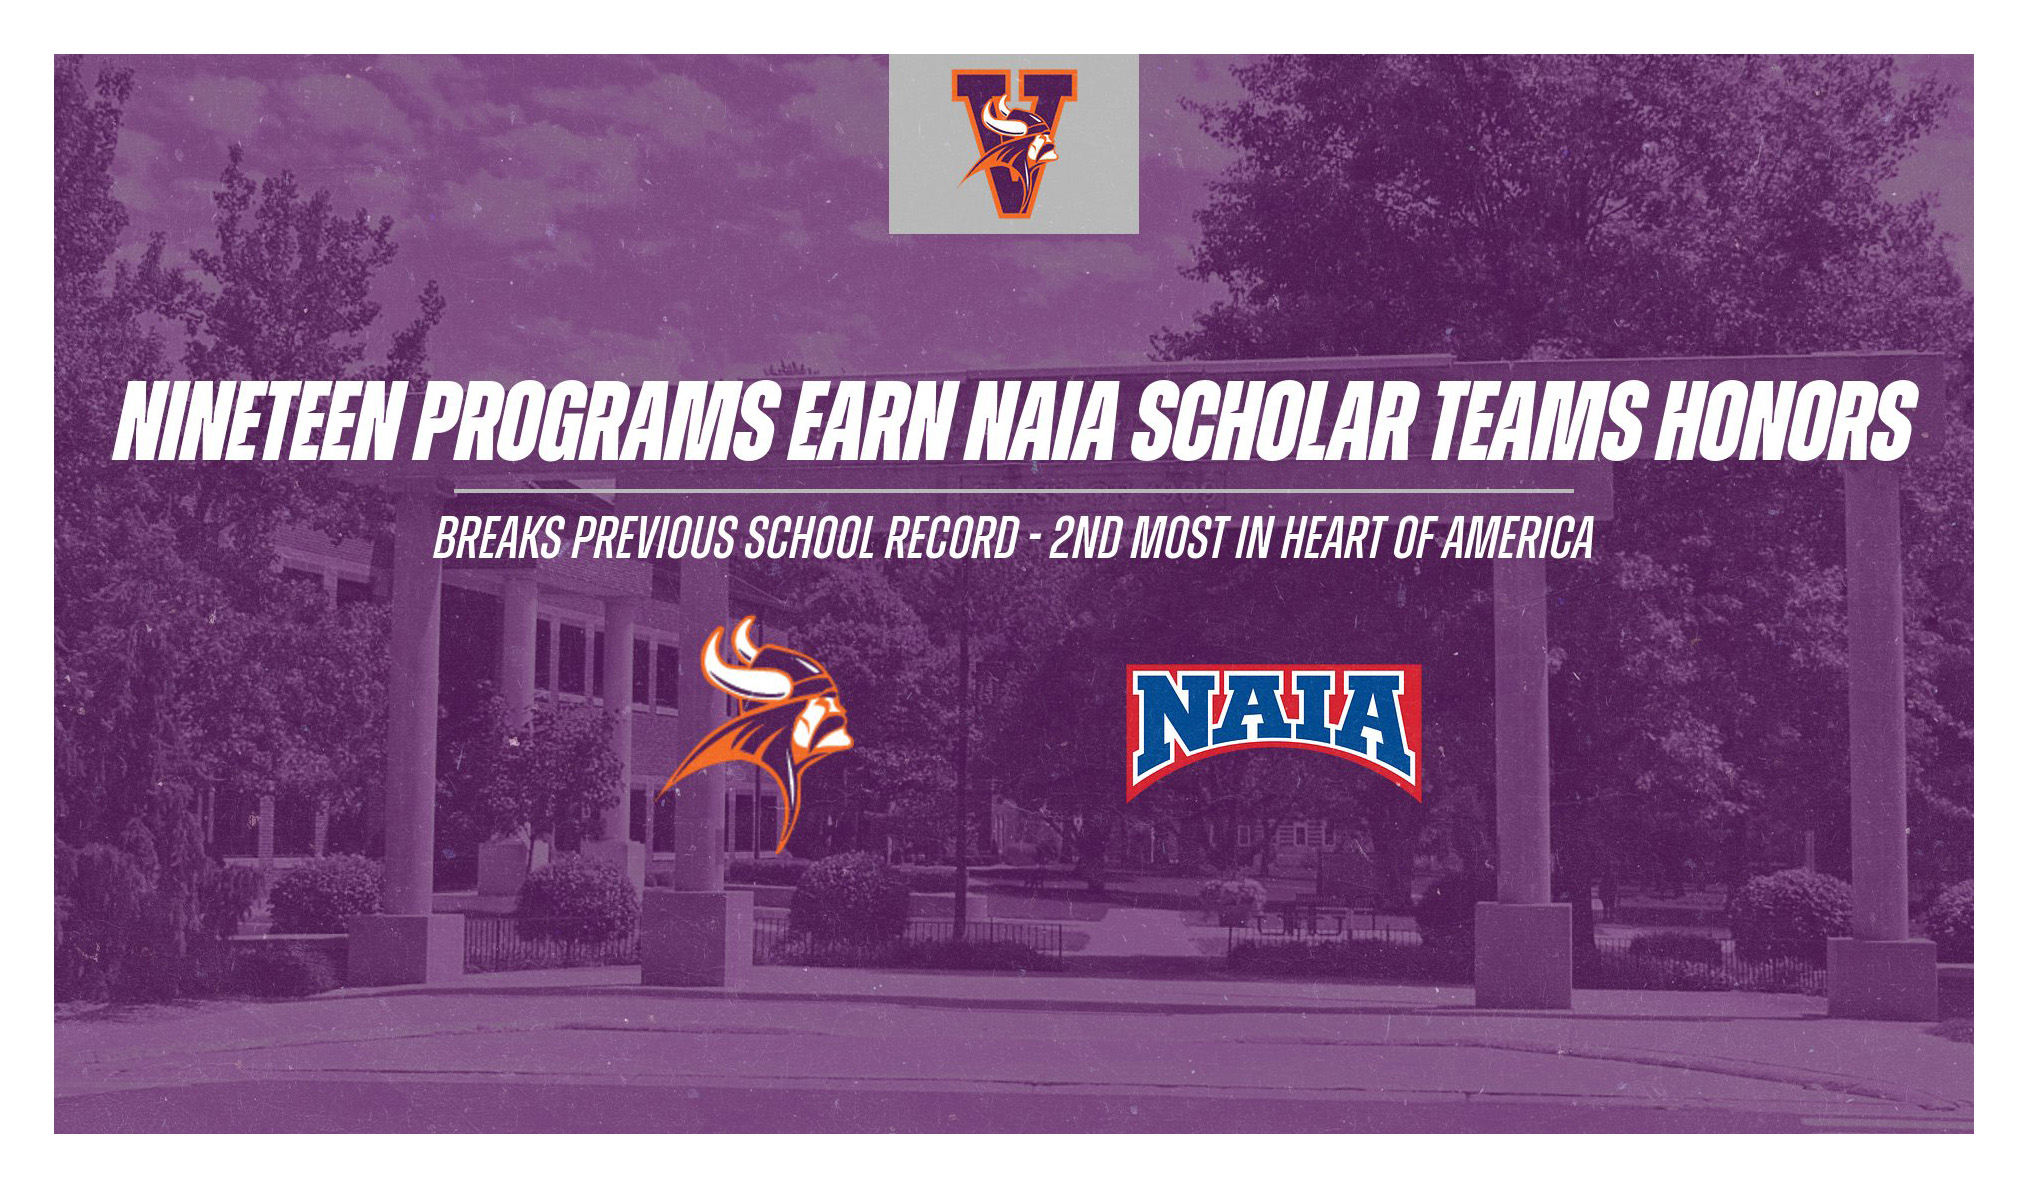 Missouri Valley College Sets New Record With 19 NAIA Scholar Teams